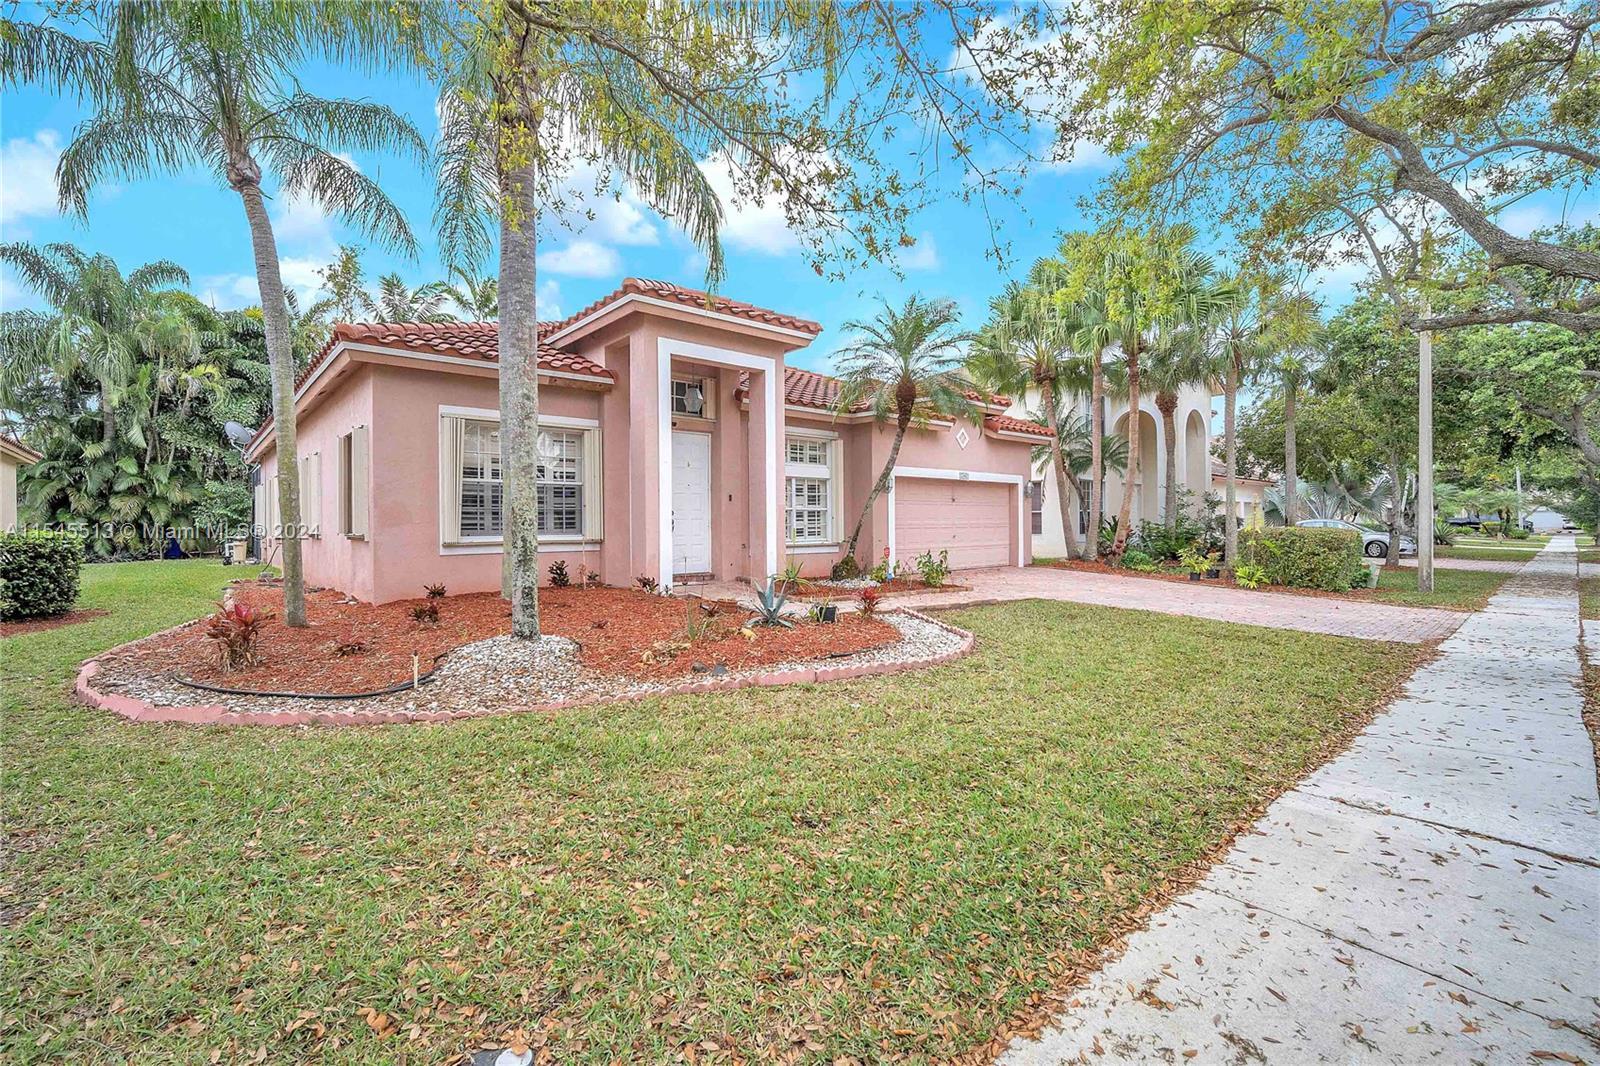 Photo of 17062 NW 16th St in Pembroke Pines, FL